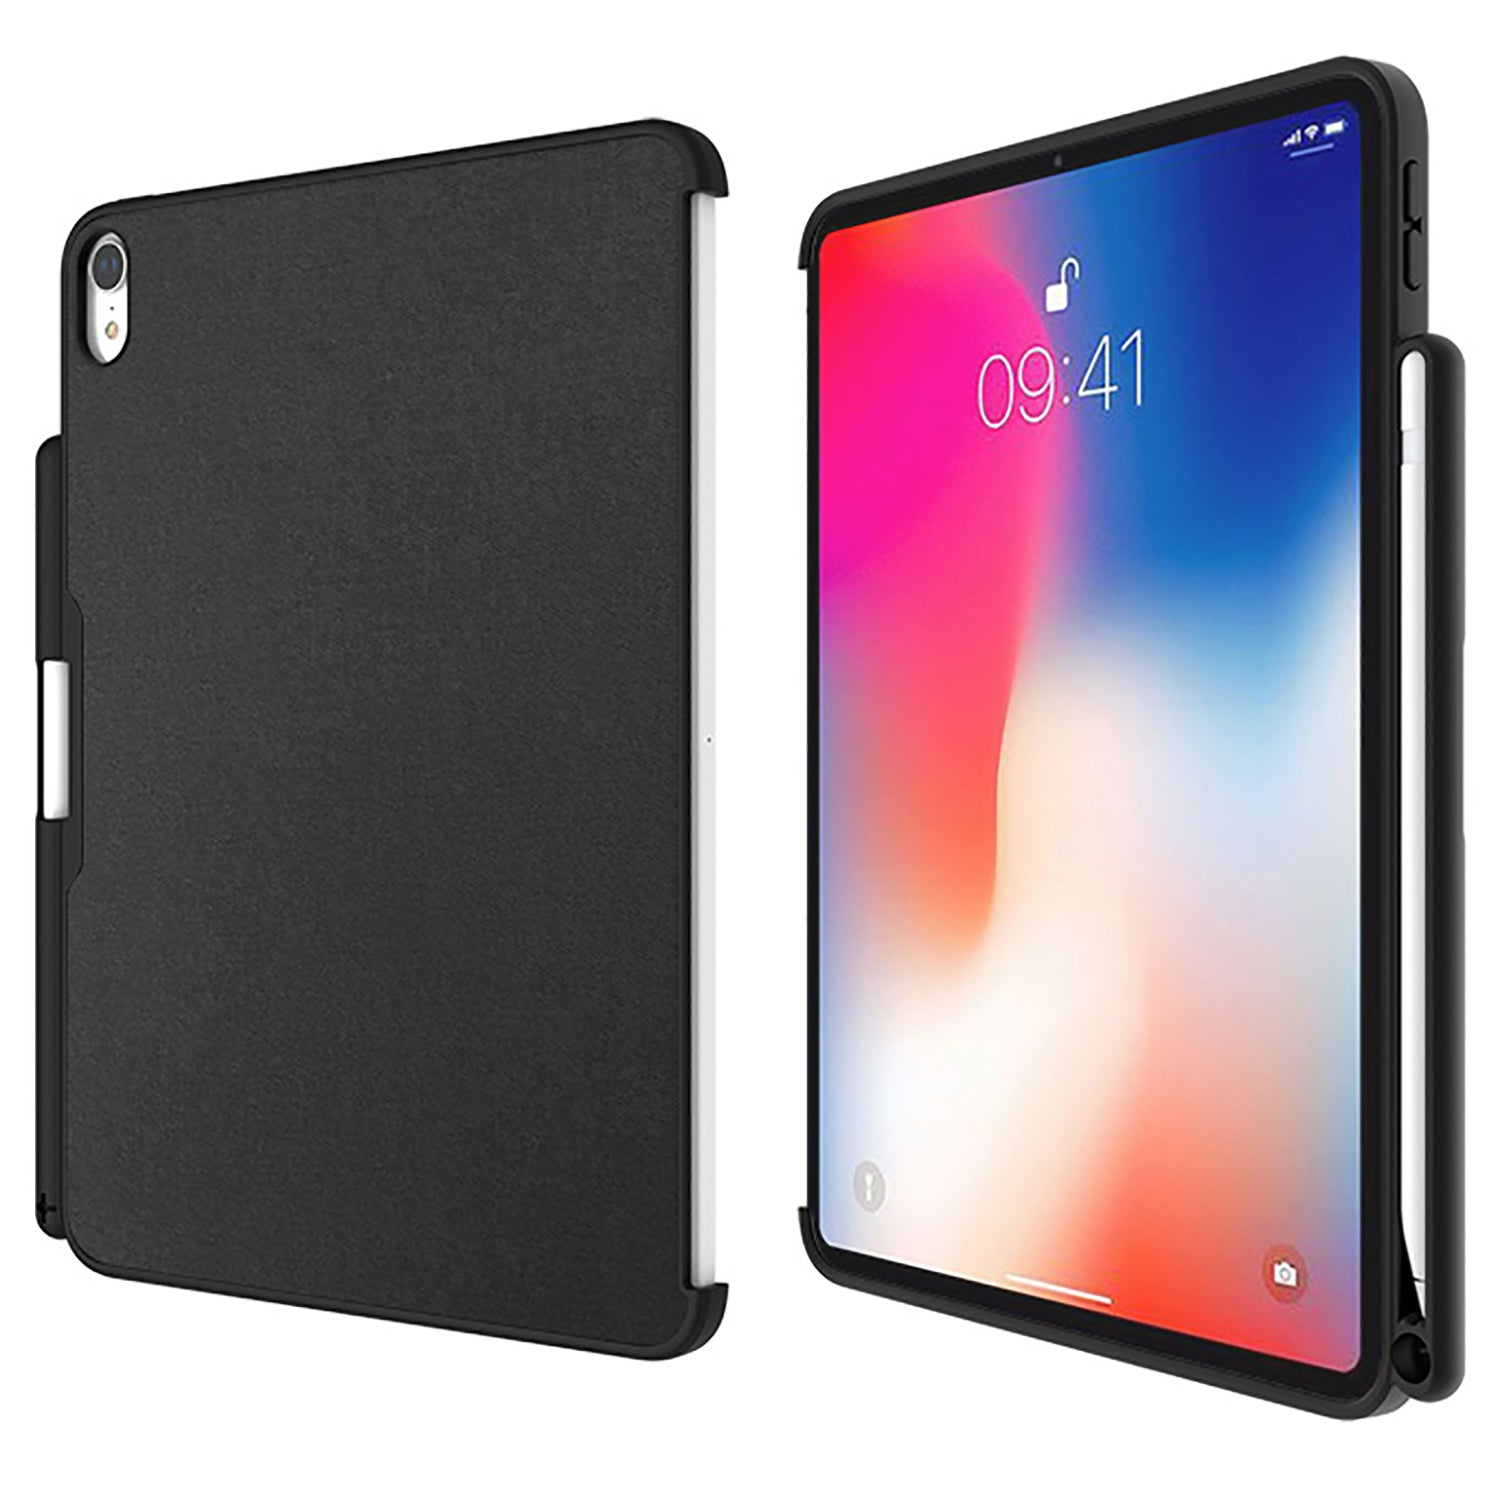 LUVVITT iPad Pro 12.9 Case with Pencil Holder Compatible with Smart Cover 2018